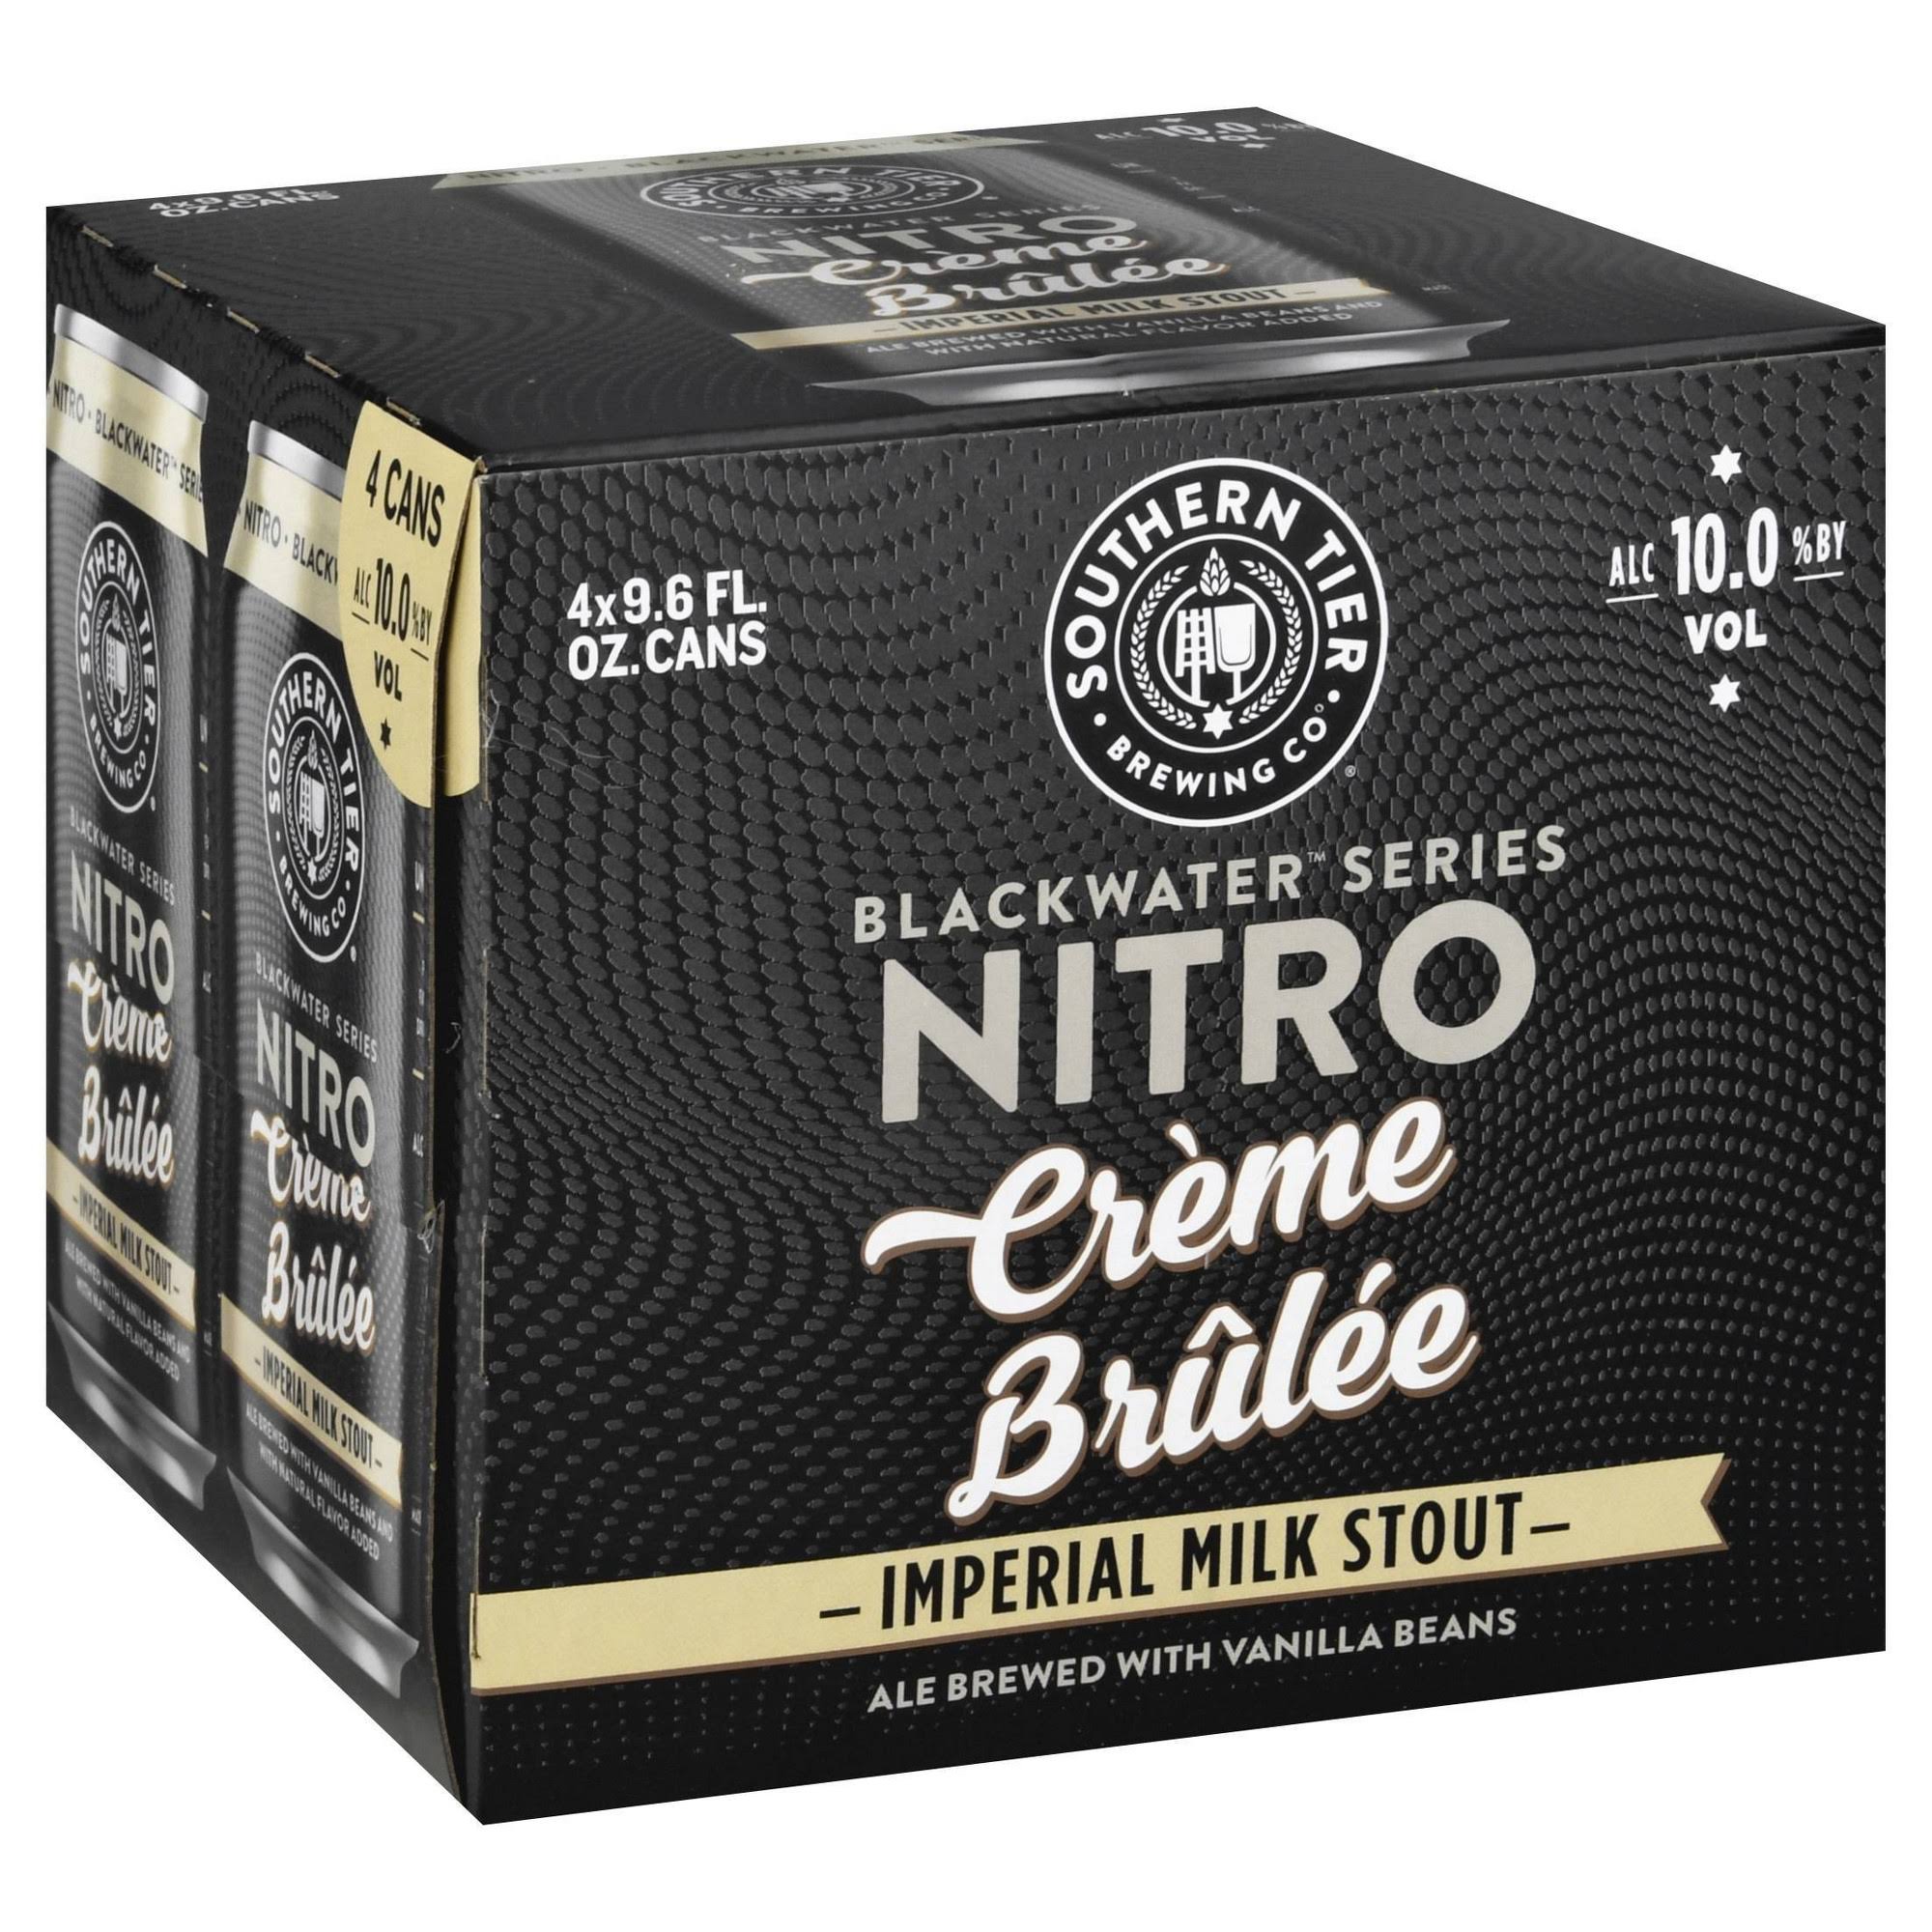 Southern Tier Brewing Co. Blackwater Series Nitro Beer, Imperial Milk Stout, Thick Mint - 4 pack, 9.6 fl oz cans